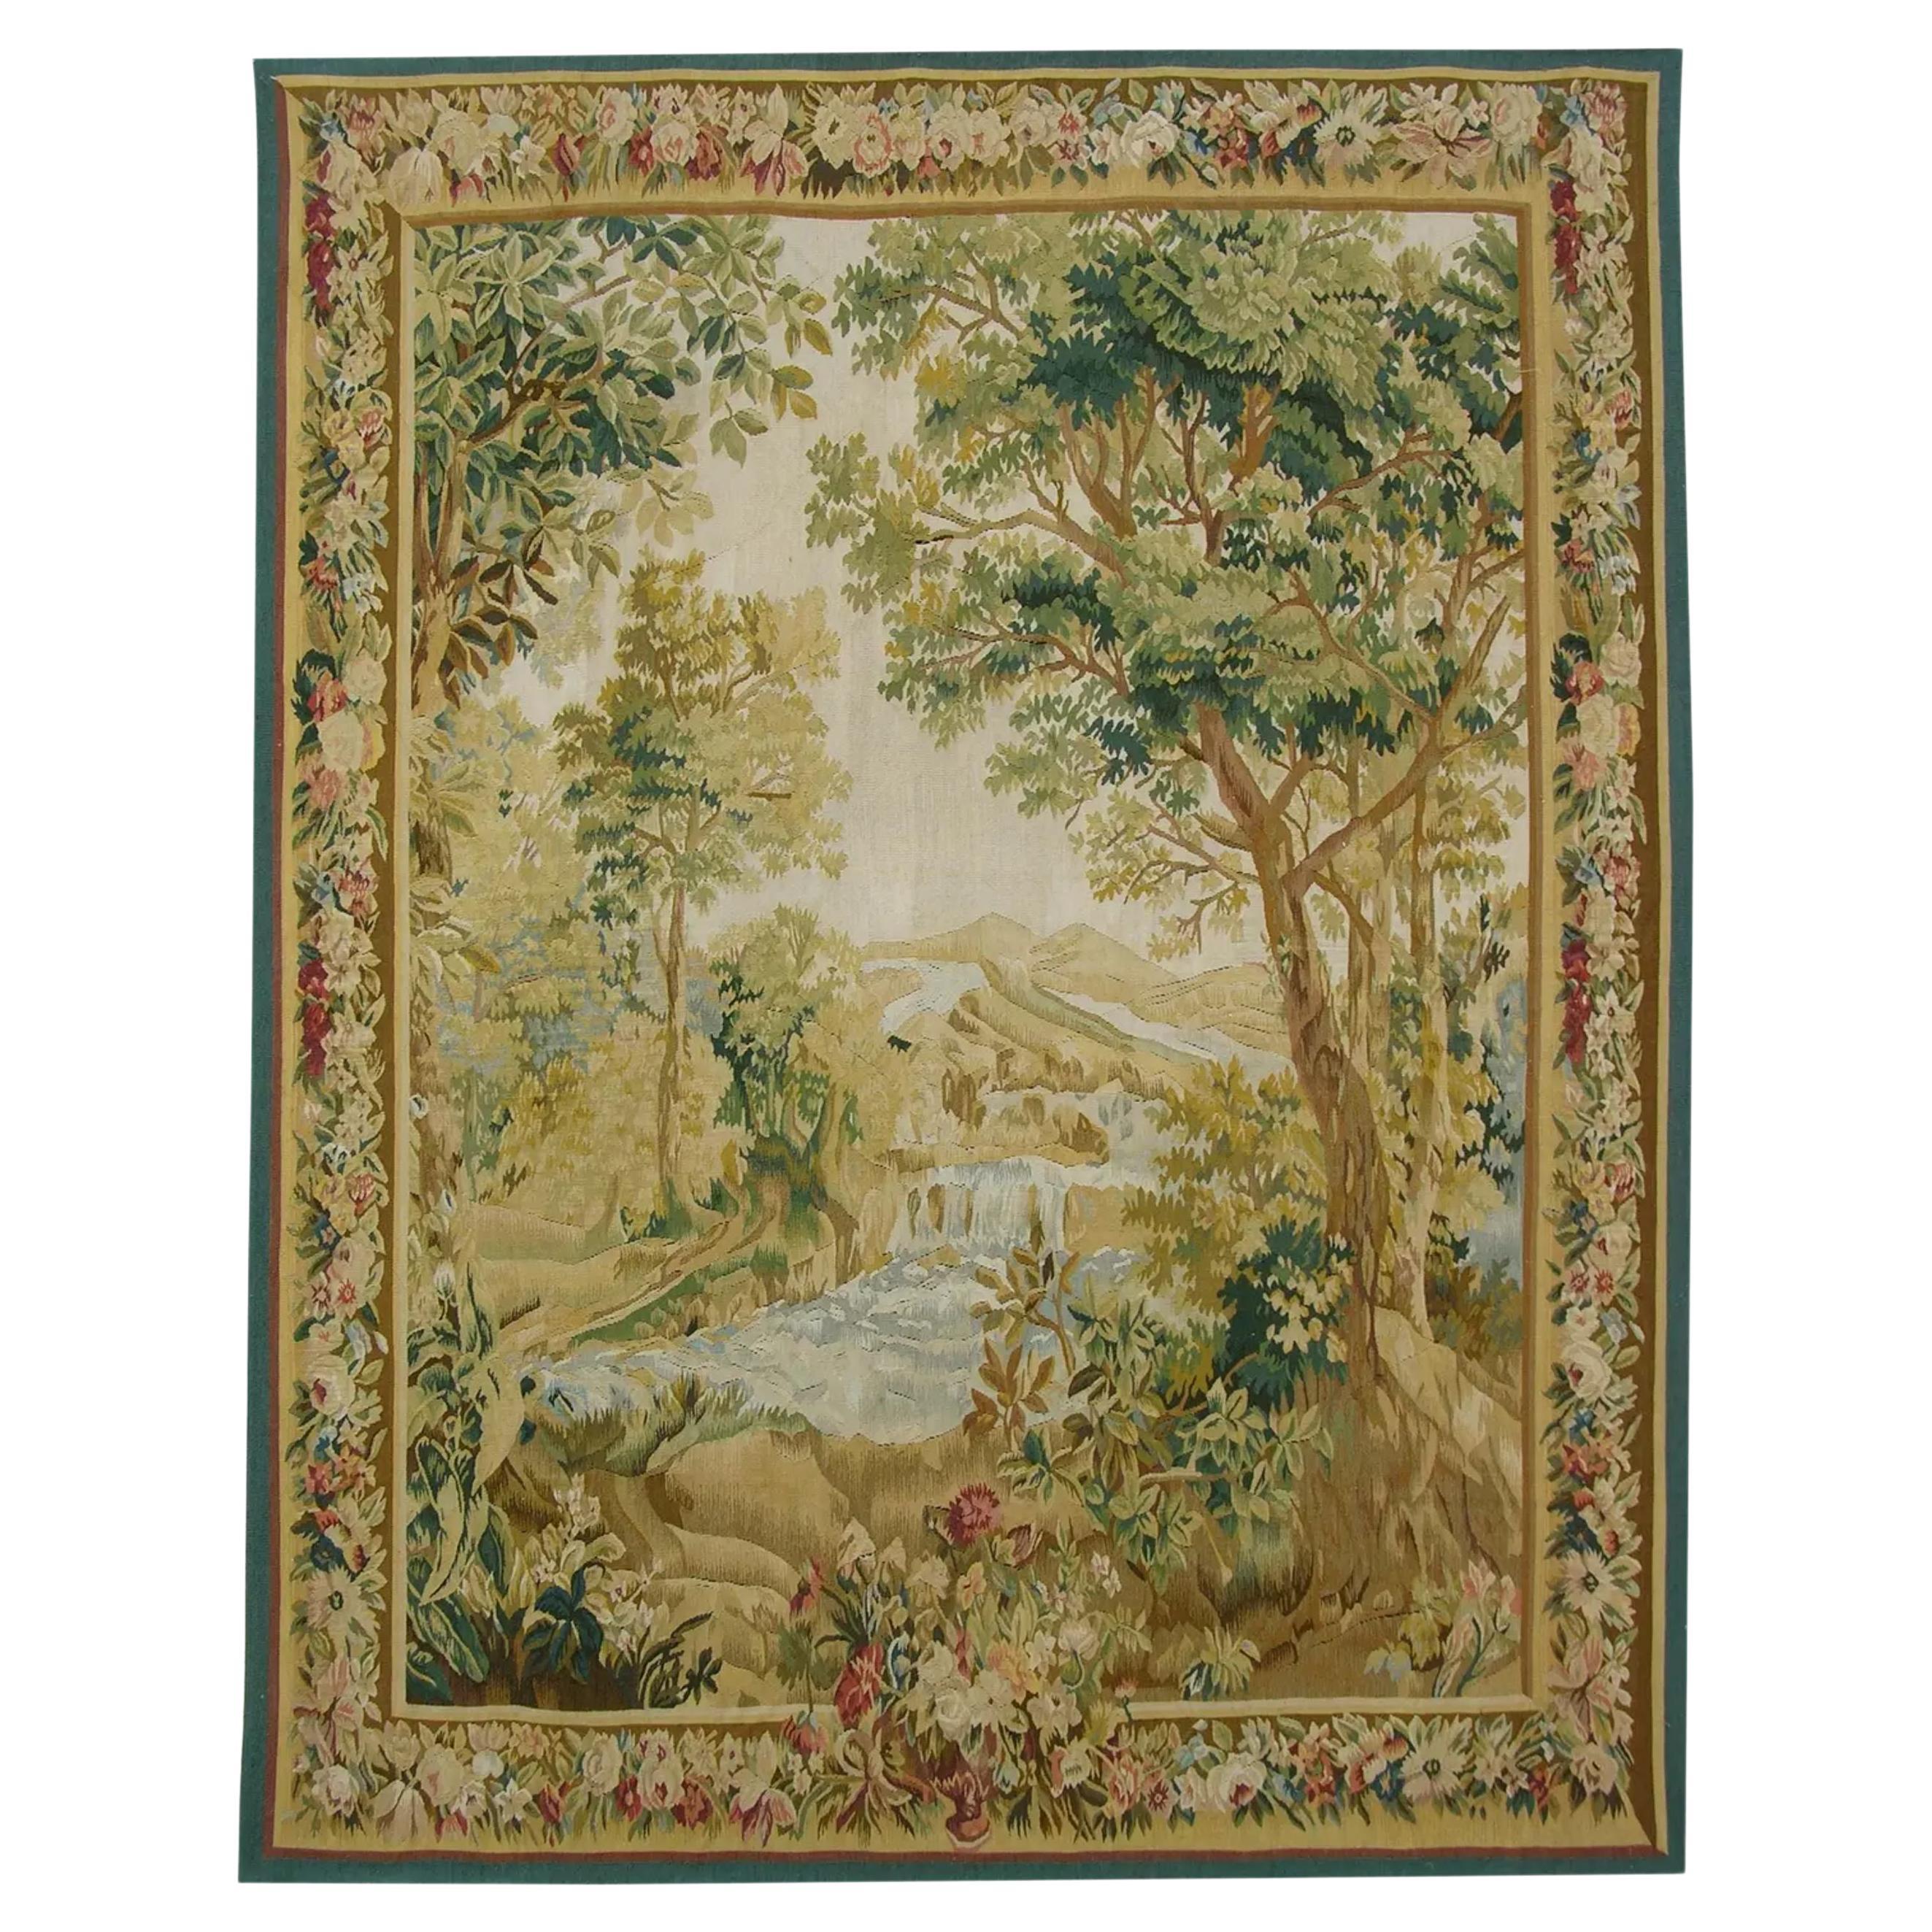 Vintage Woven Outdoor Scene Tapestry 6.25X5.0 For Sale